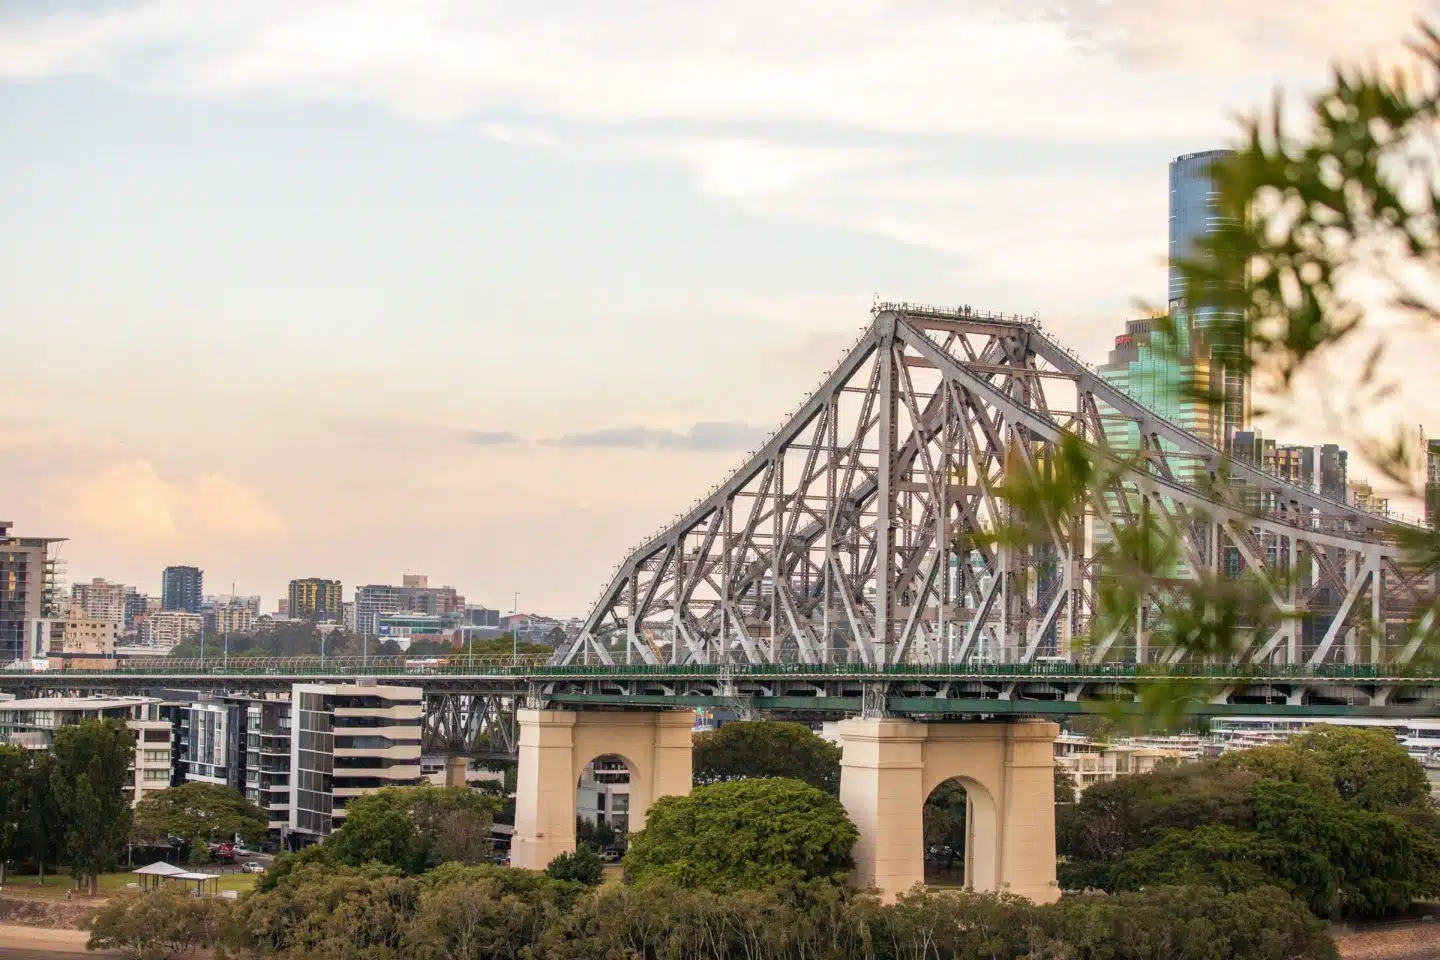 Fun Things to do in Brisbane, by Travel Blogger What The Fab